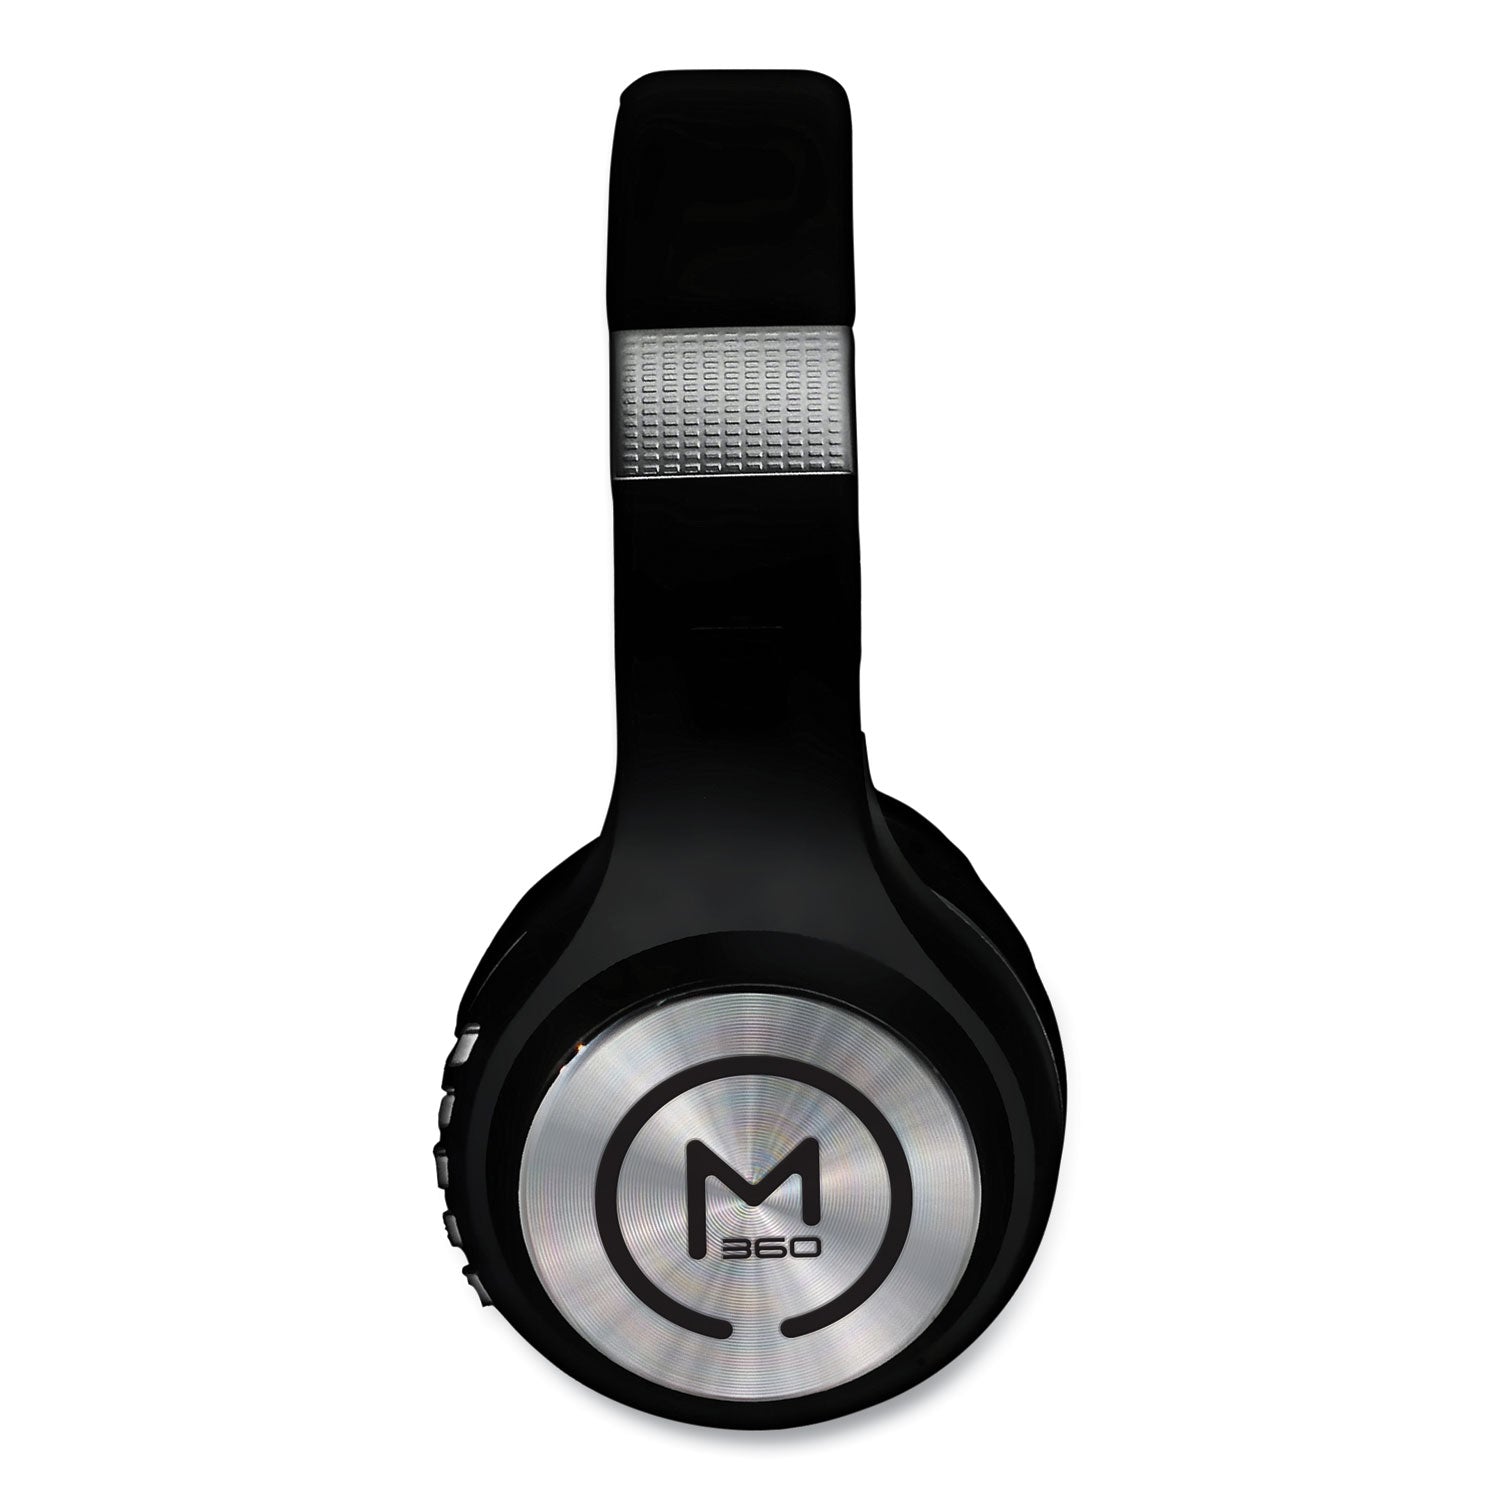 serenity-stereo-wireless-headphones-with-microphone-3-ft-cord-black-silver_mhshp5500b - 3